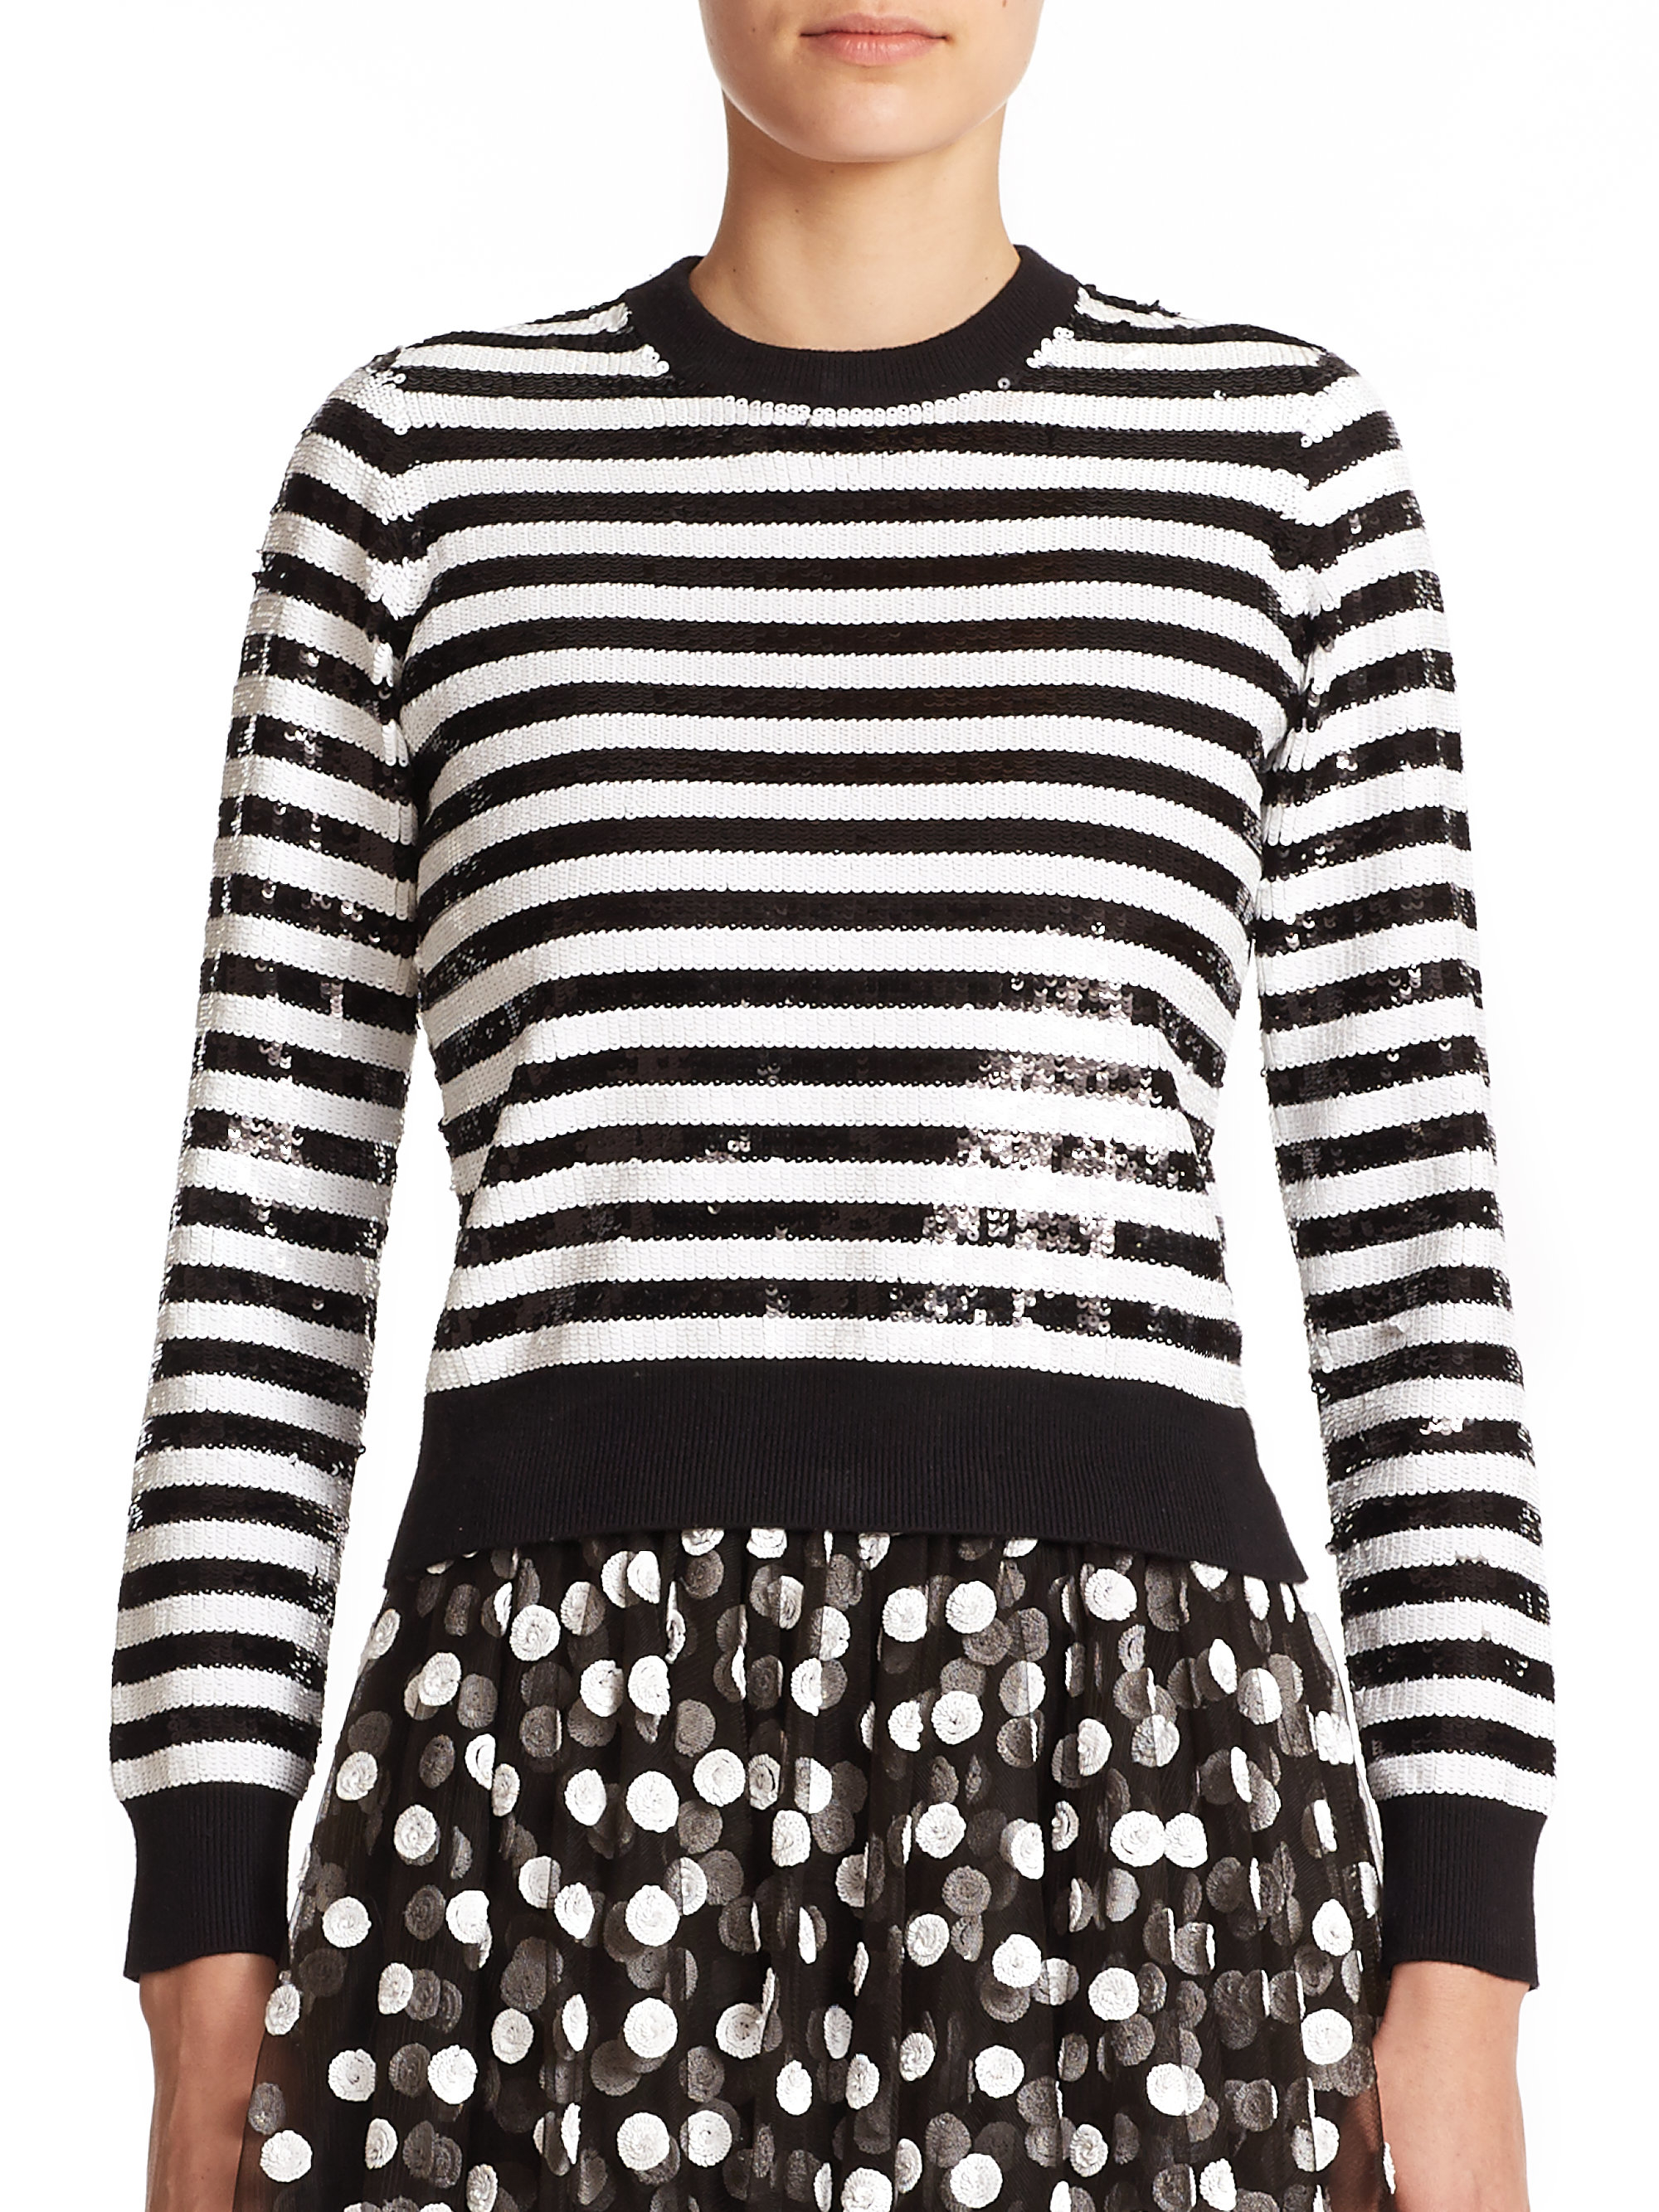 Michael kors Sequined Stripe Sweater in White | Lyst